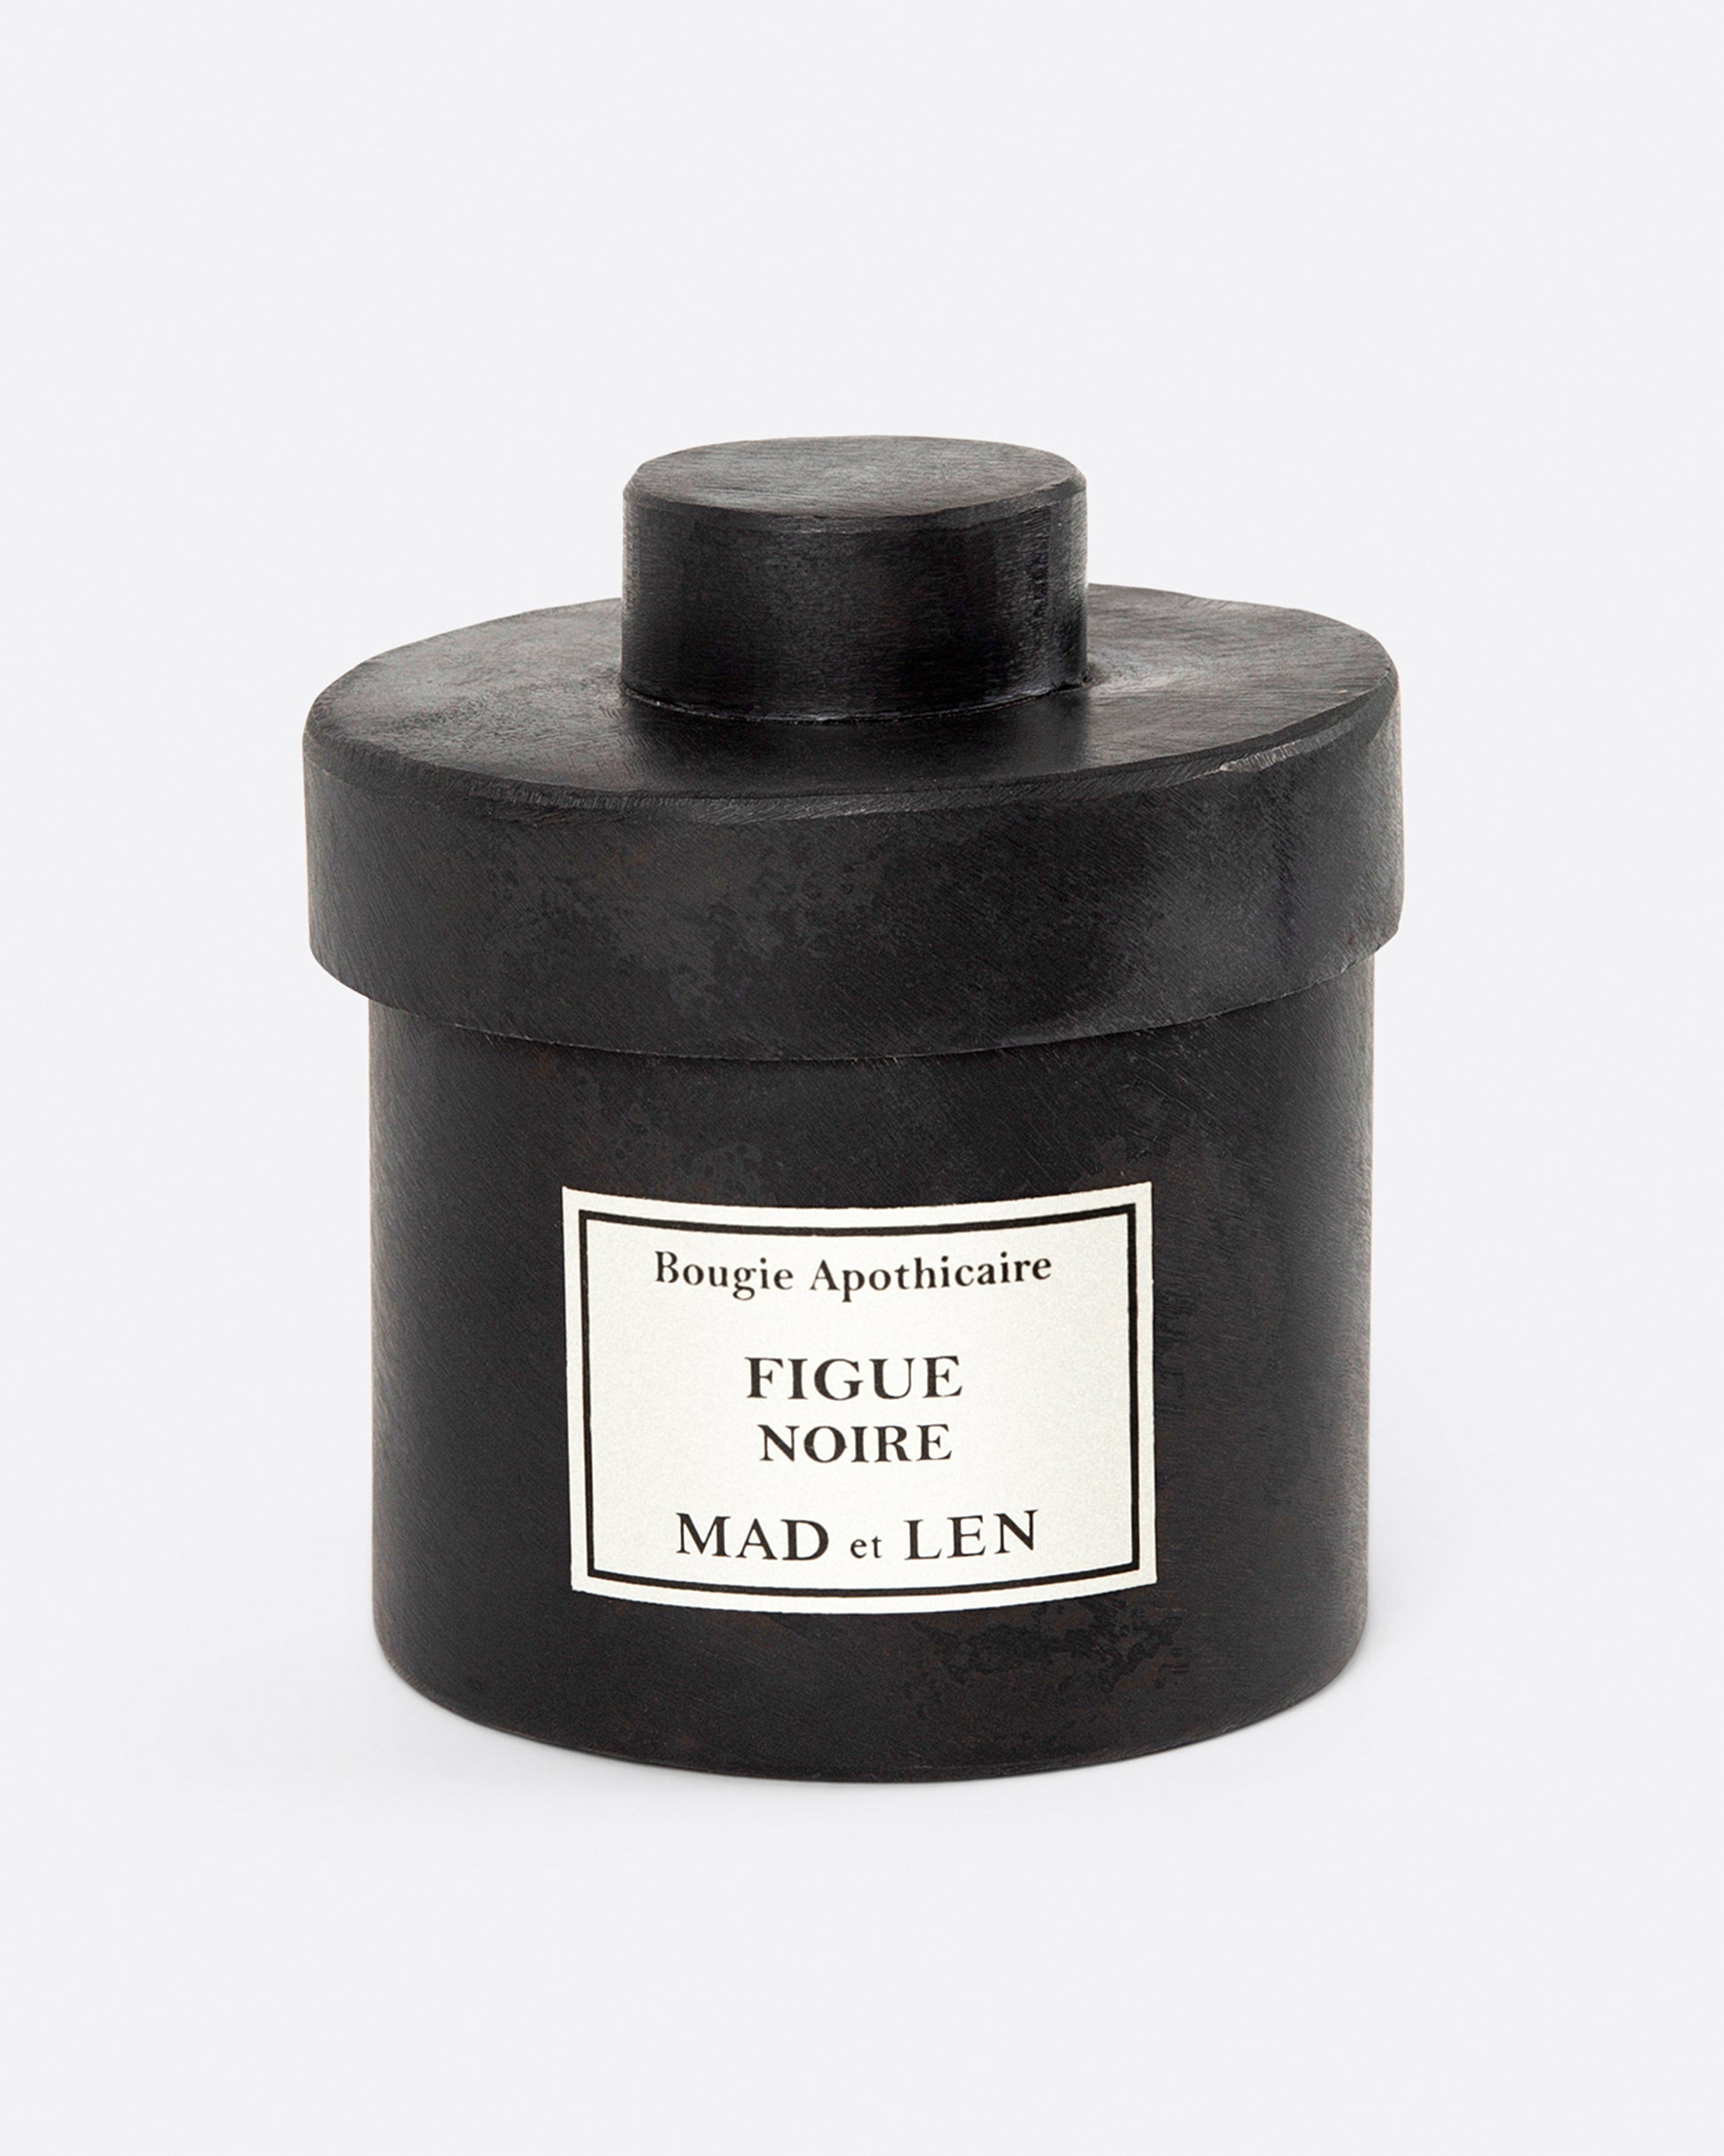 Mad et Len Figue Noire candle, shown from the front.